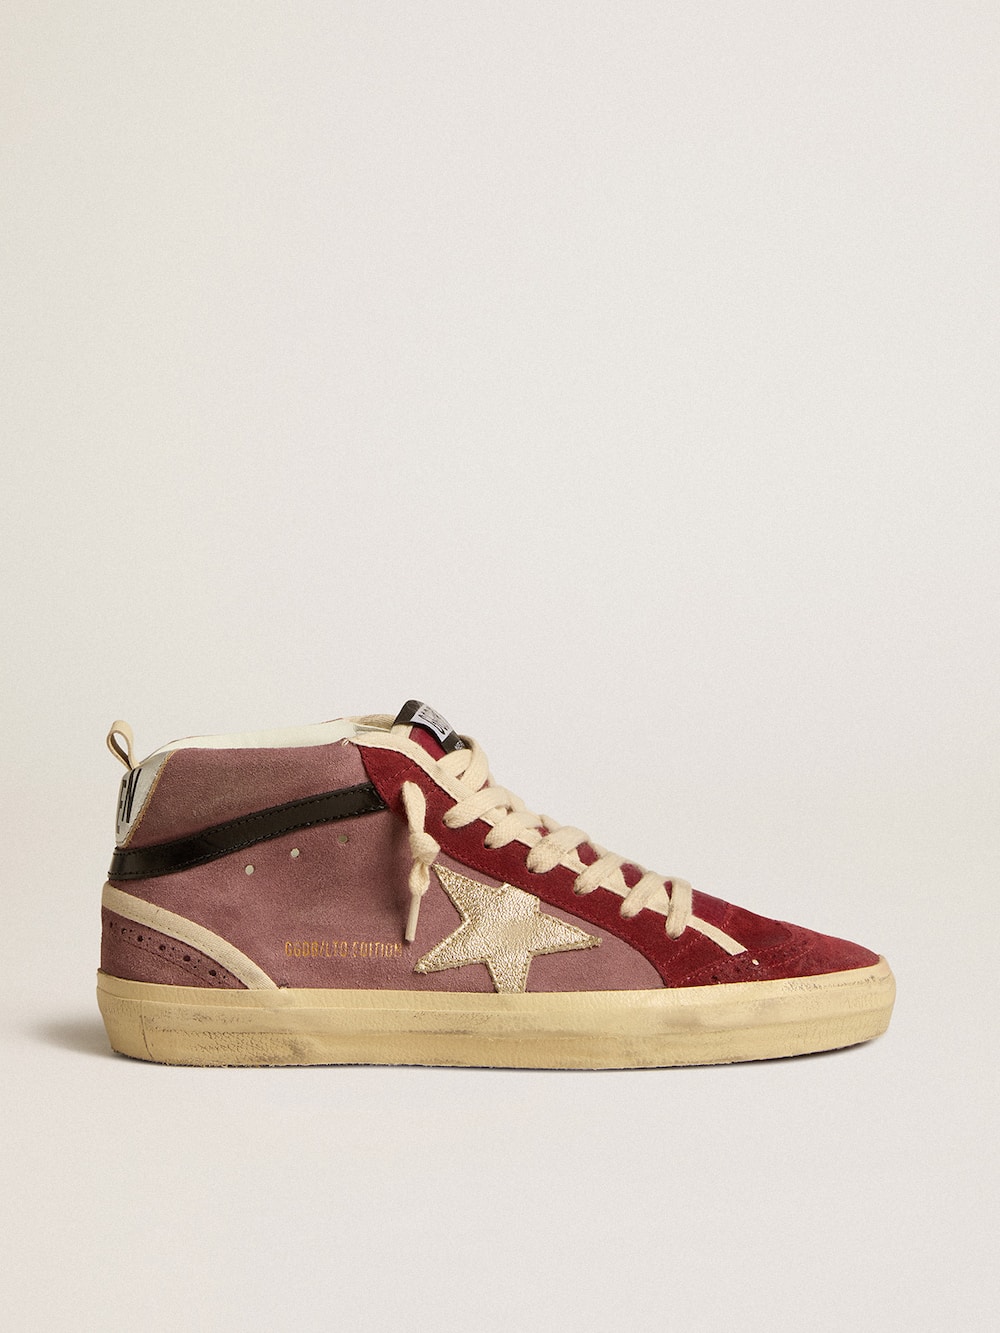 Golden Goose - Mid Star LTD in violet suede with platinum leather star and black flash in 